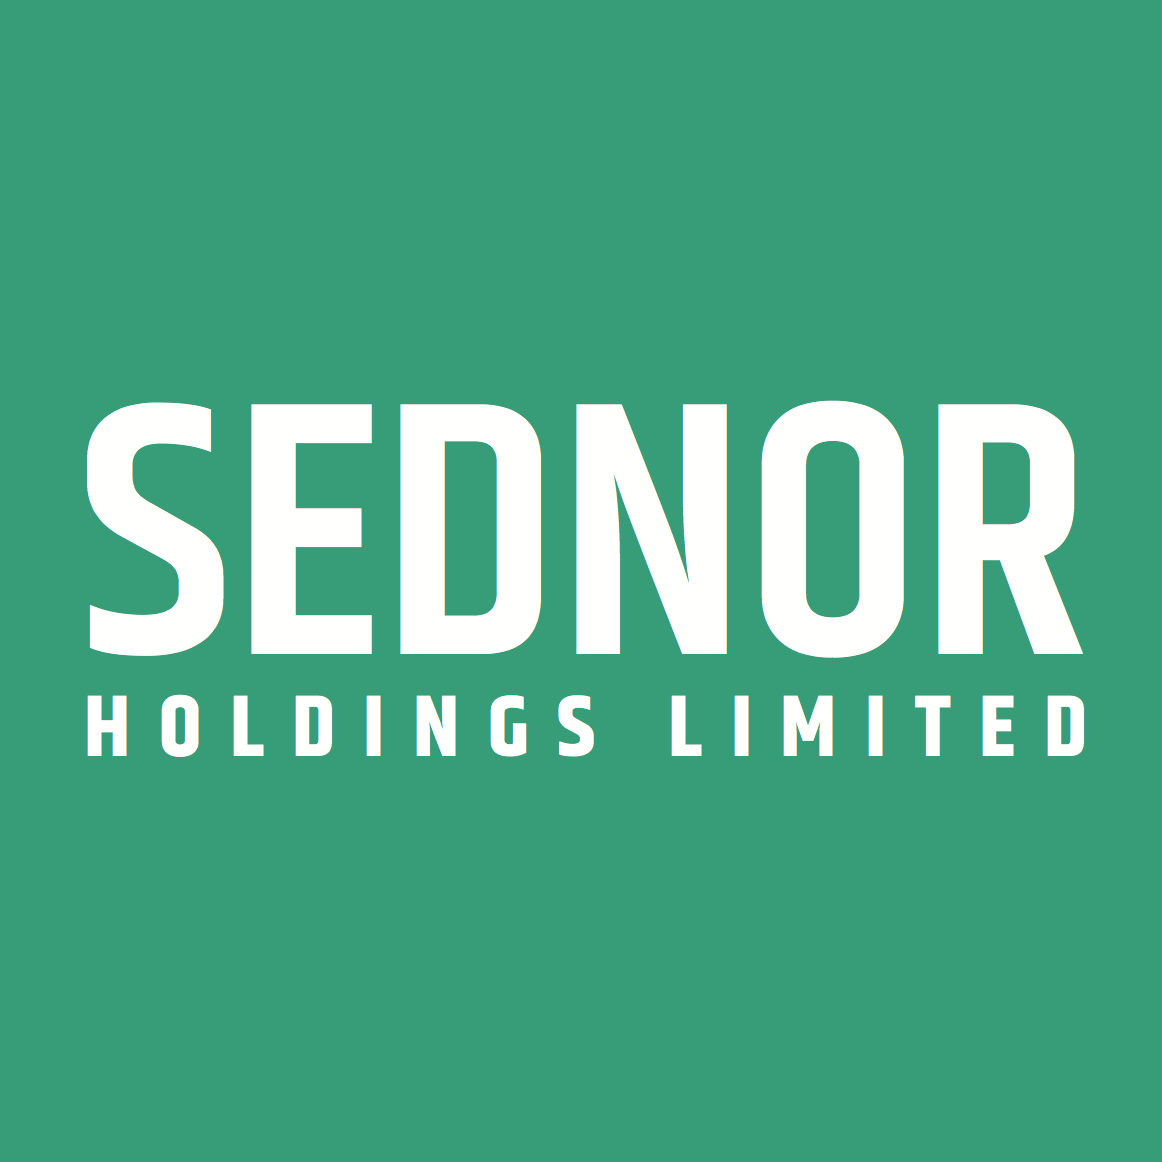 Sednor Holdings Limited profile on Qualified.One